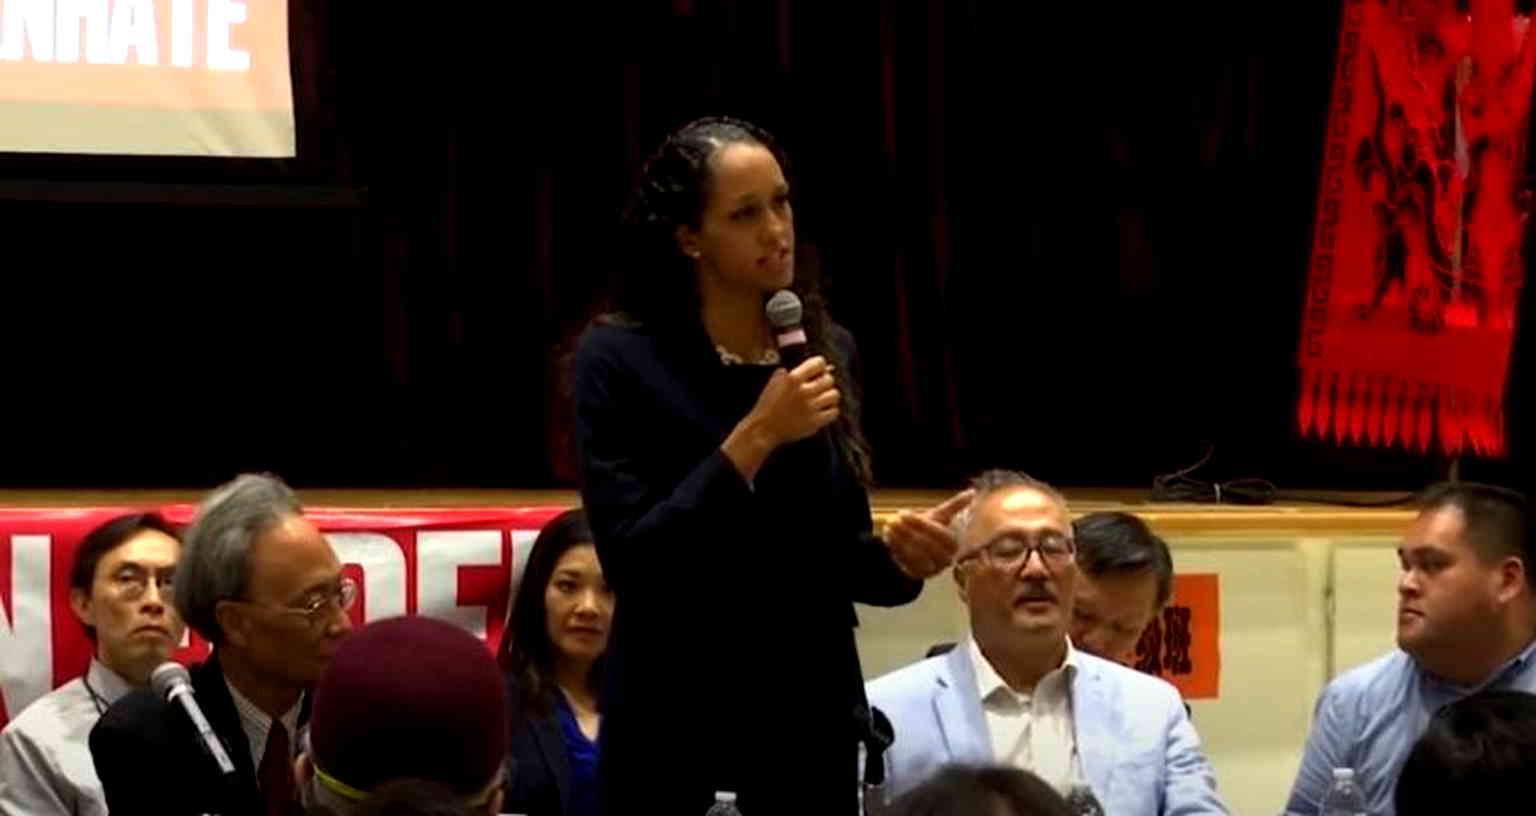 SF DA Jenkins to Asian Americans at town hall: ‘You are now seen and heard’